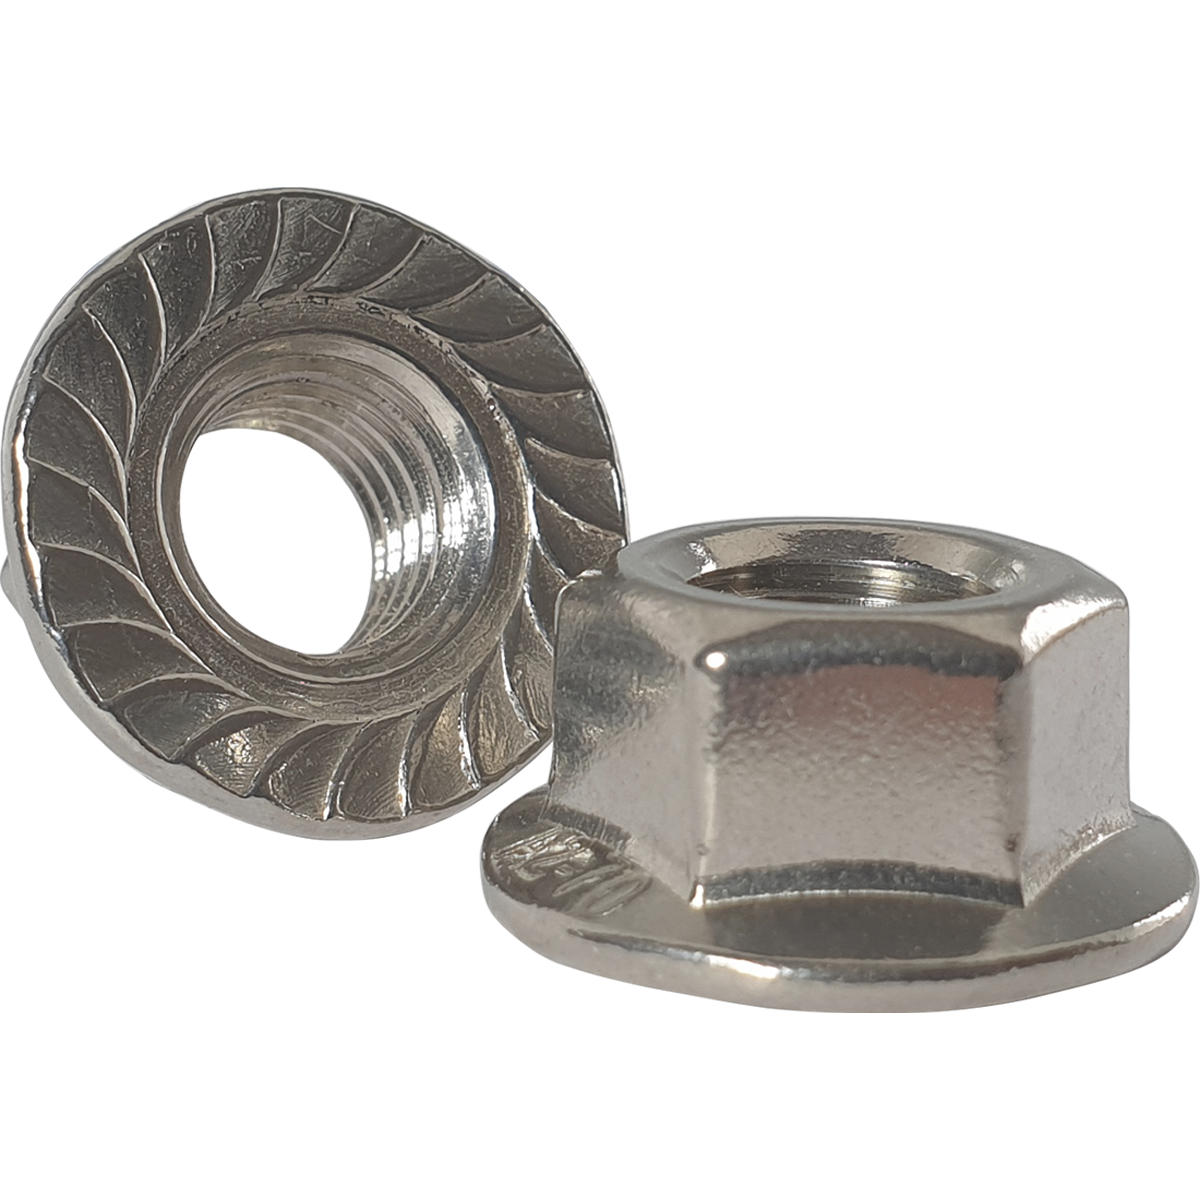 Competitive prices on serrated flanged hexagon nuts, which are also known as a flange nut, or flange head nuts.